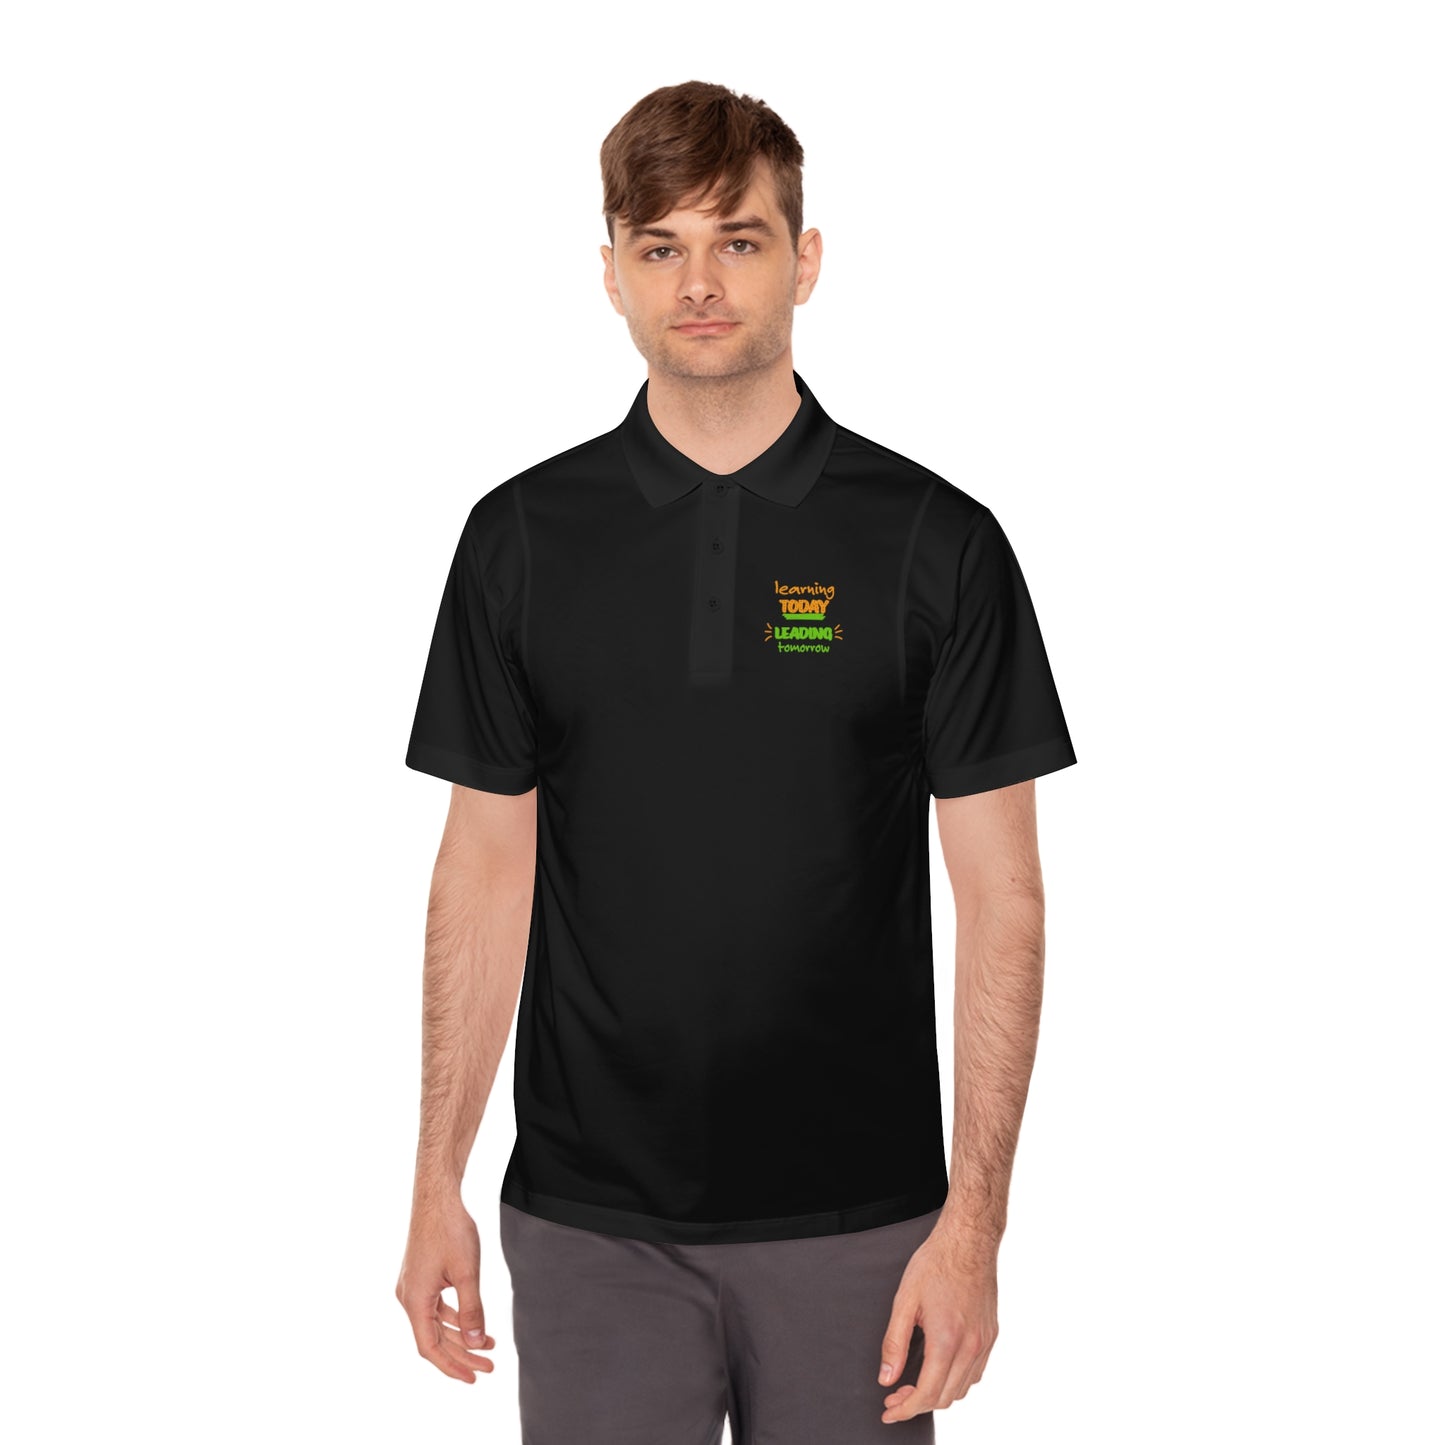 Learning Today Leading Tomorrow Polo Shirt